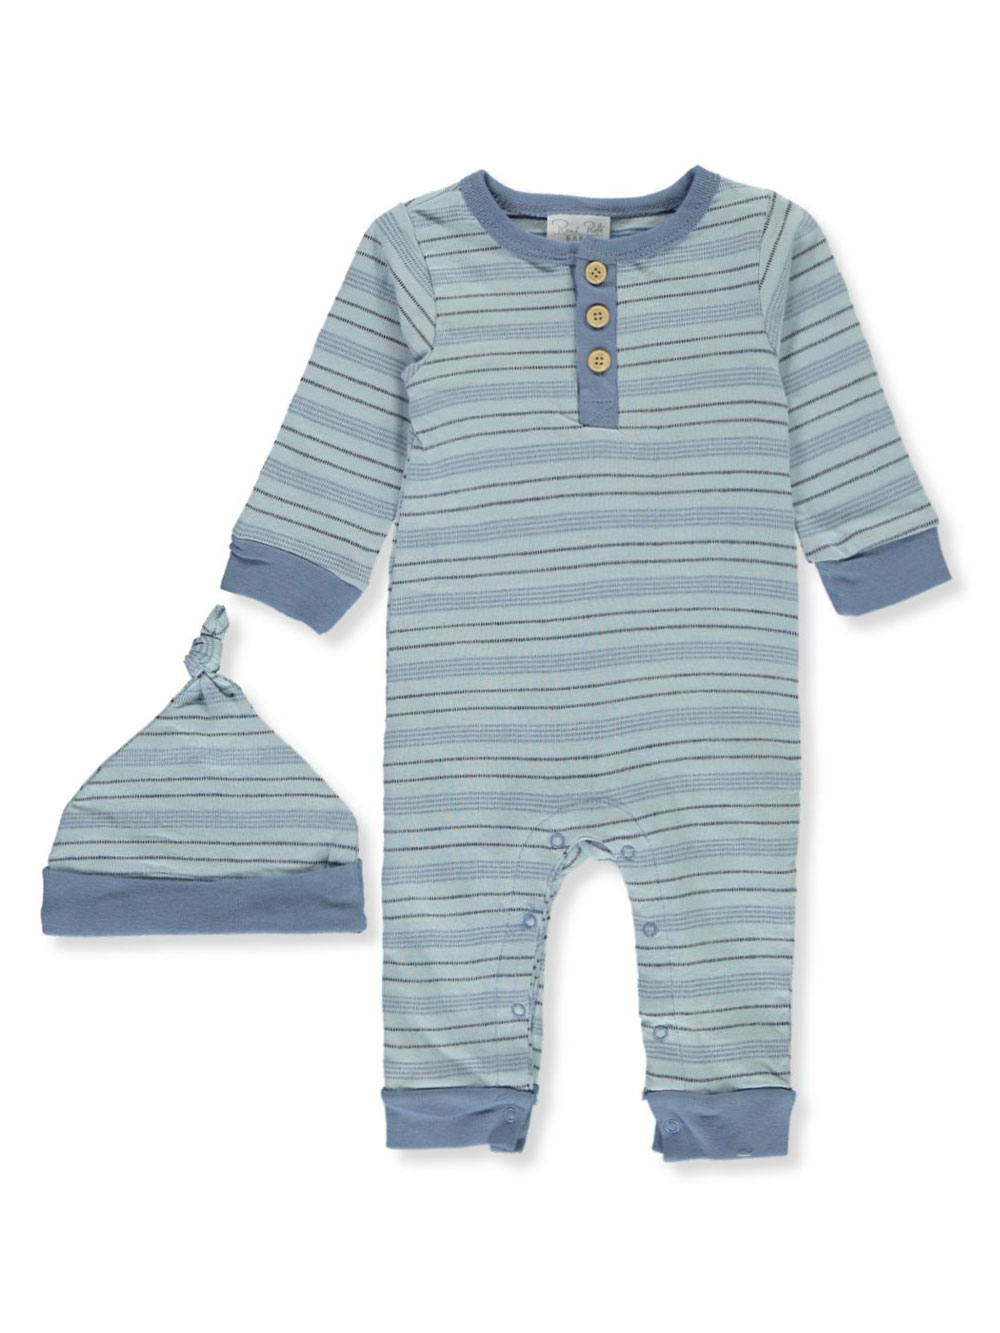 Baby Boys' 2-Piece Coveralls Set Outfit